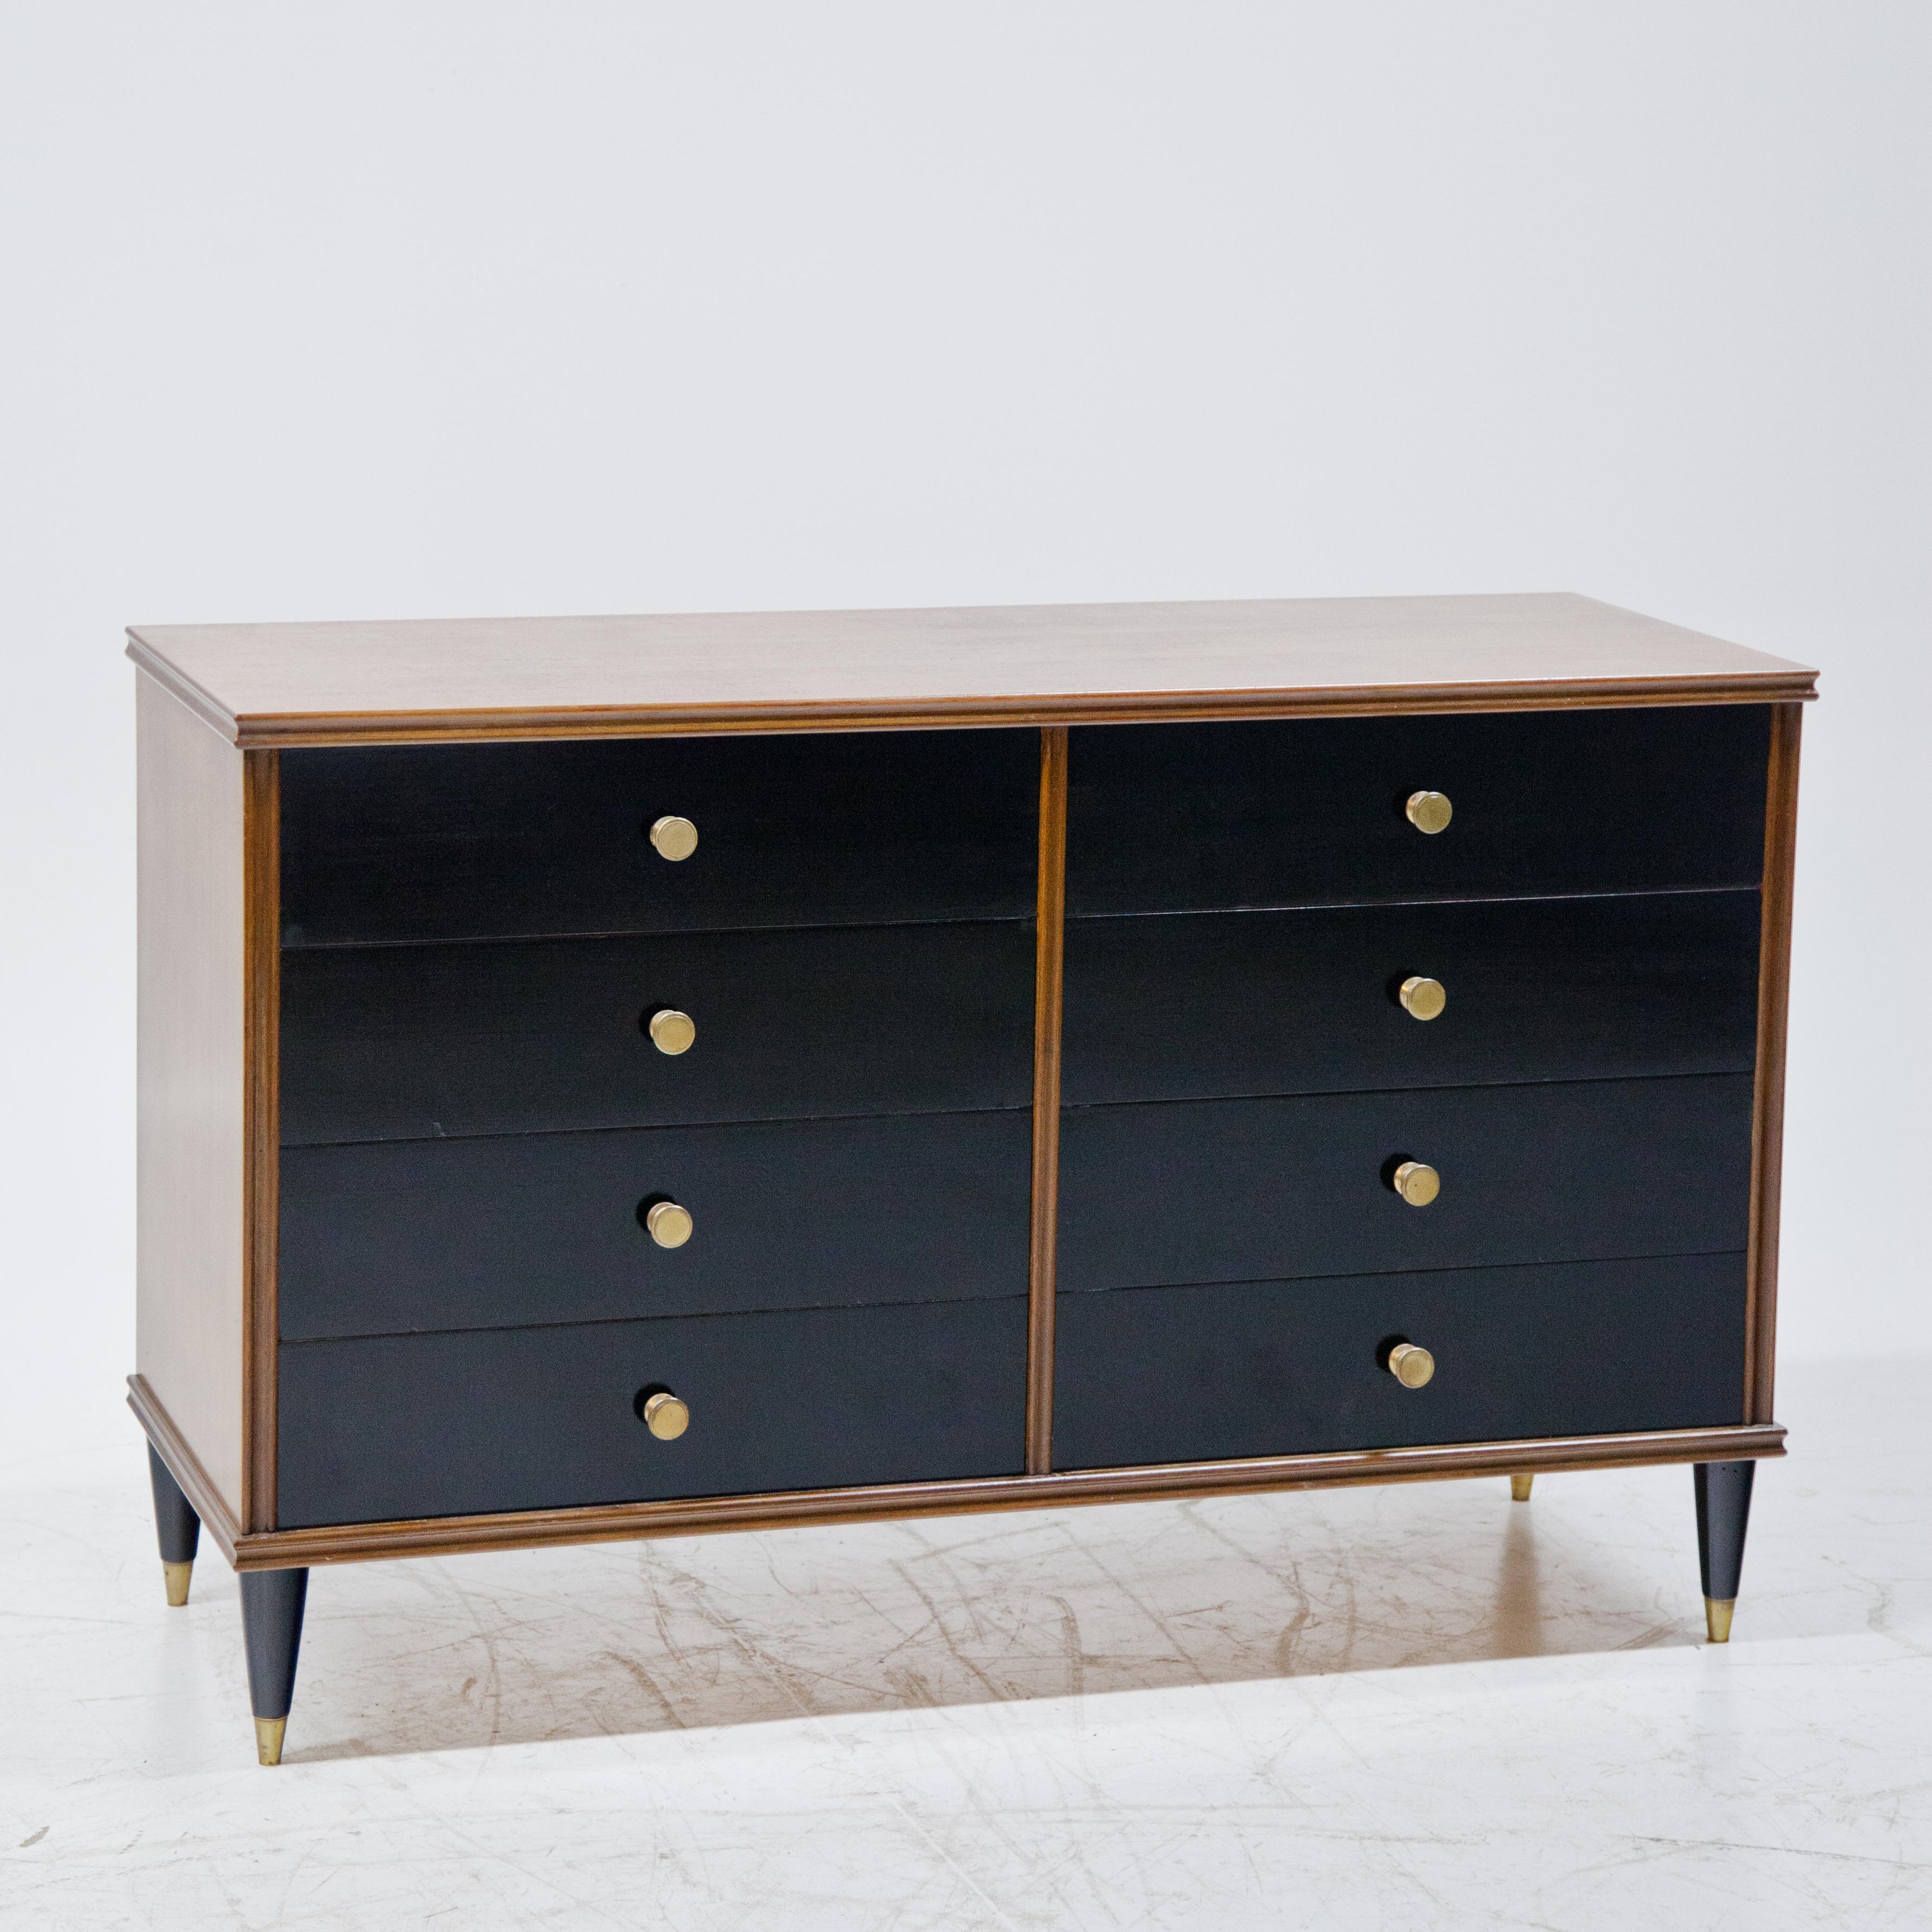 Italian midcentury chest of drawers on conical black feet with brass sabots. The straight-line body with profiled edges and eight drawers with round pull handles and blackened front.